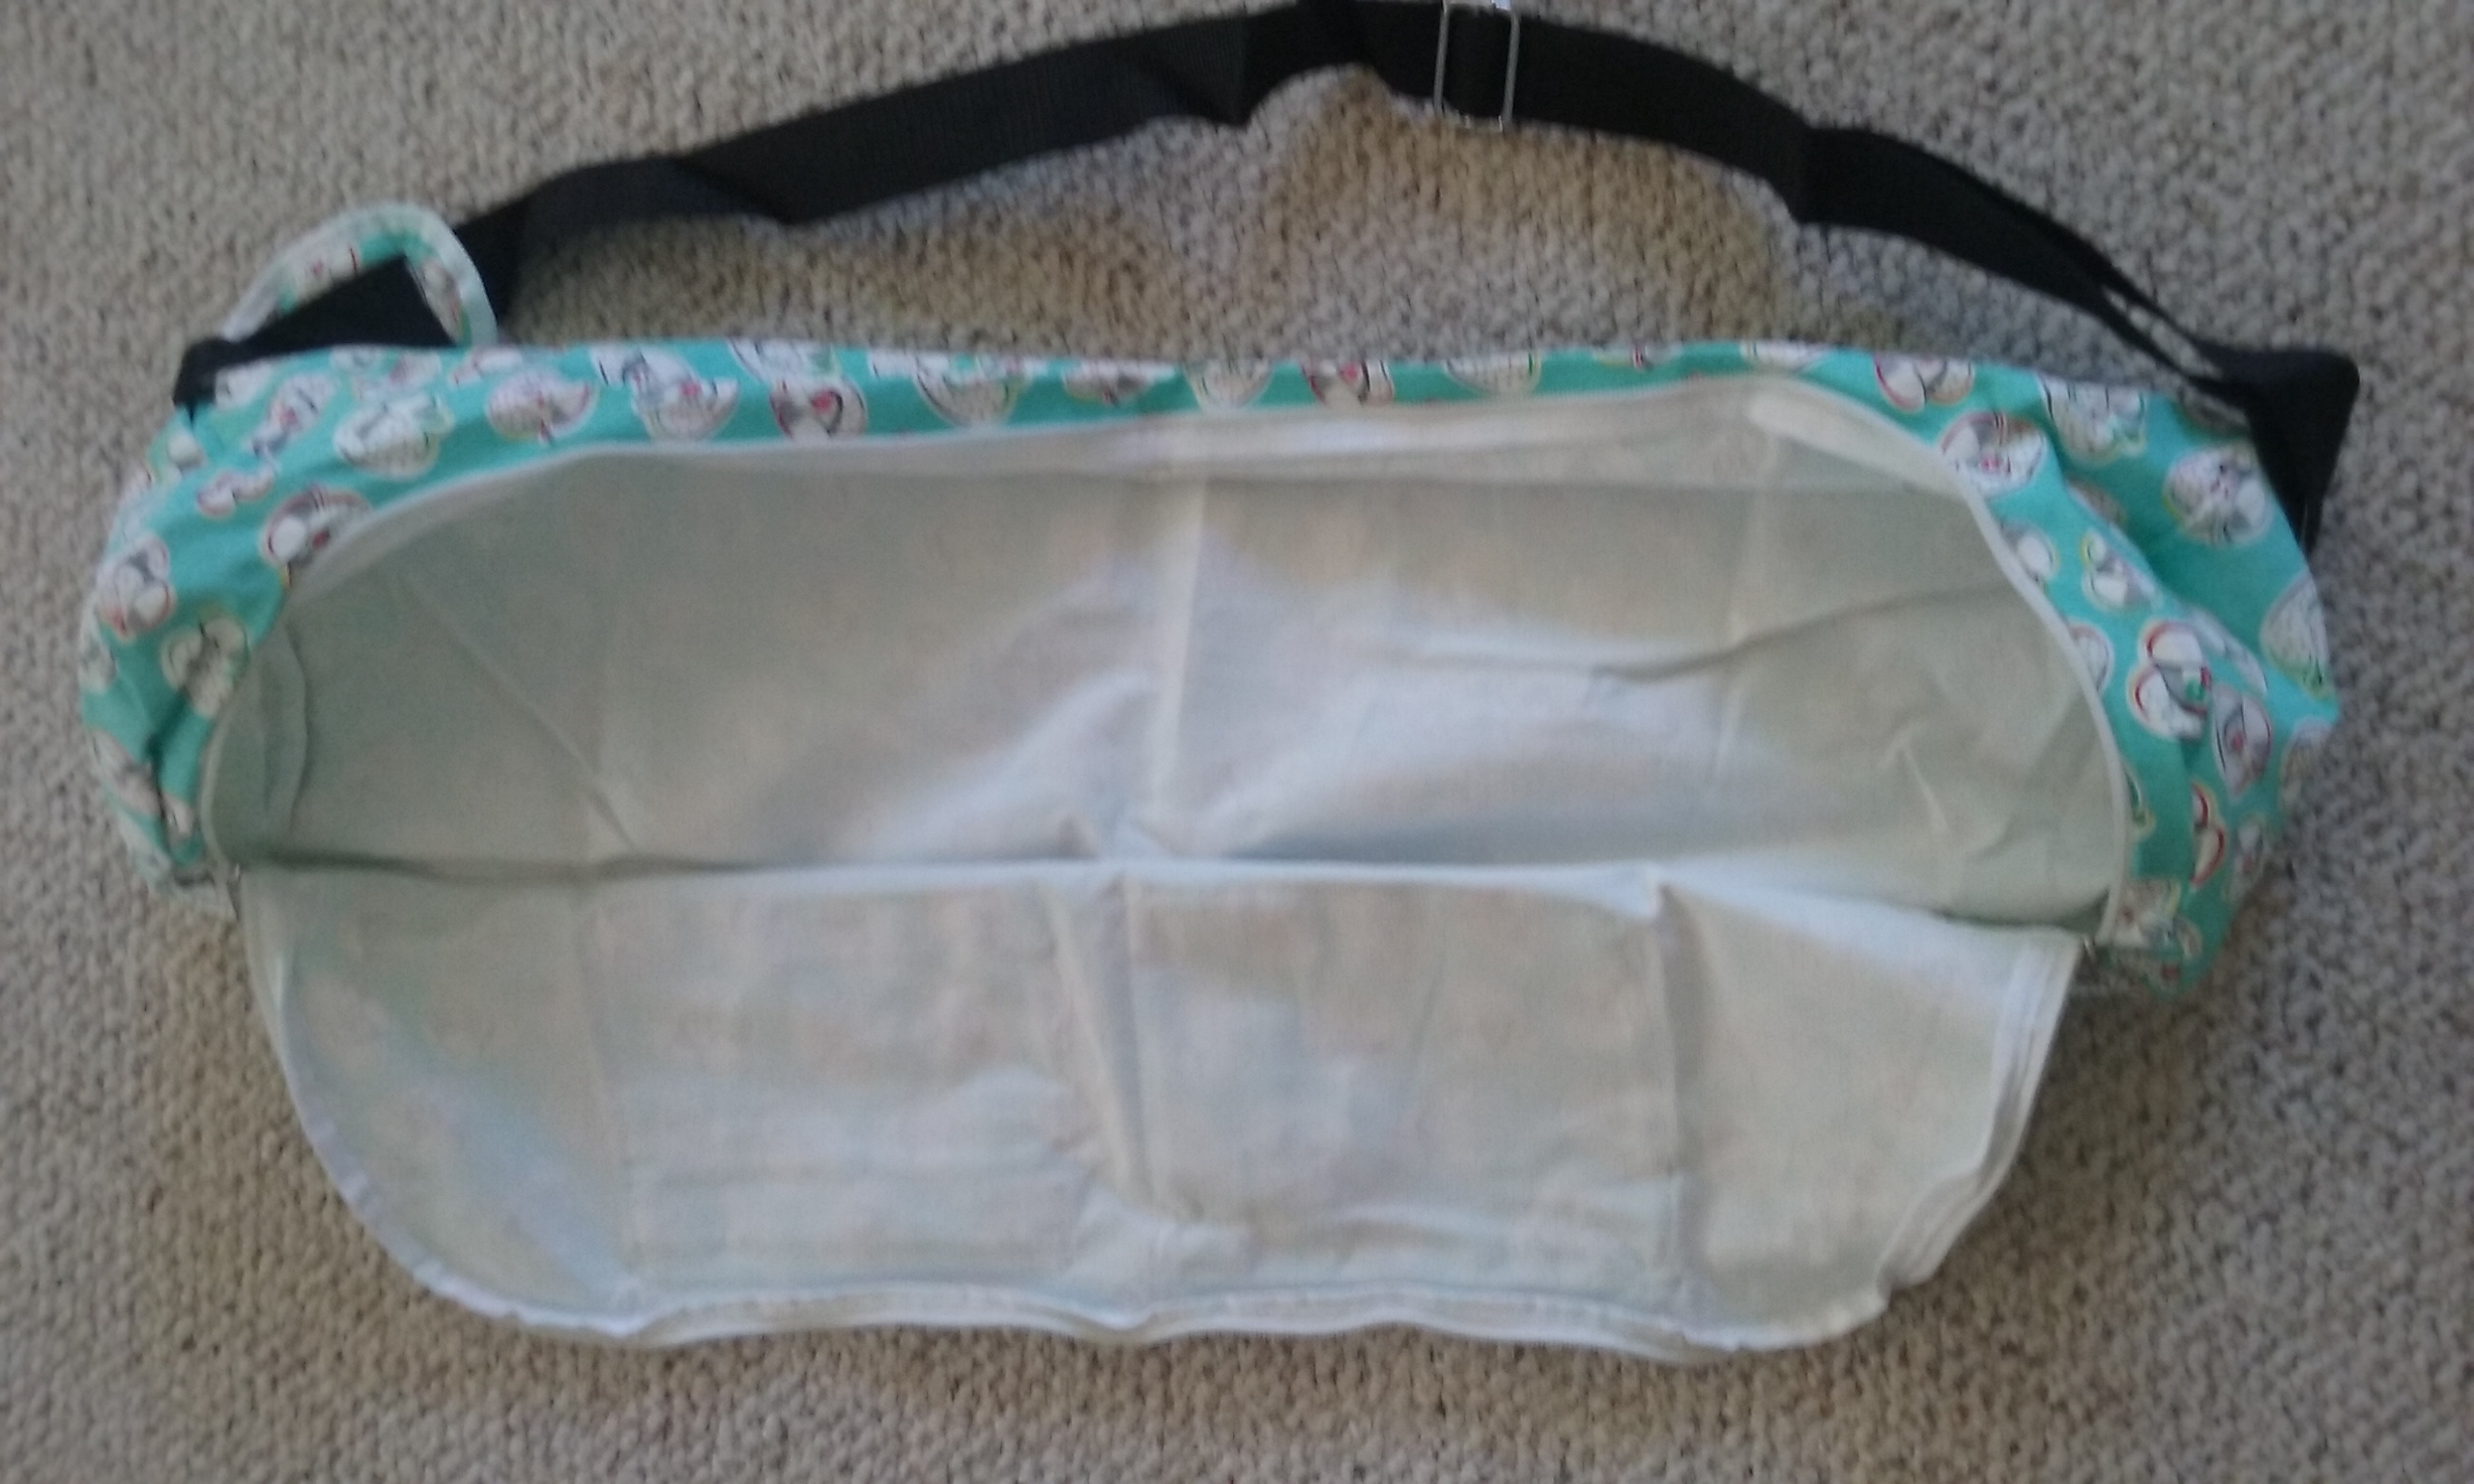 CUTE EXERCISE MAT BAG - NO MAT INCLUDED